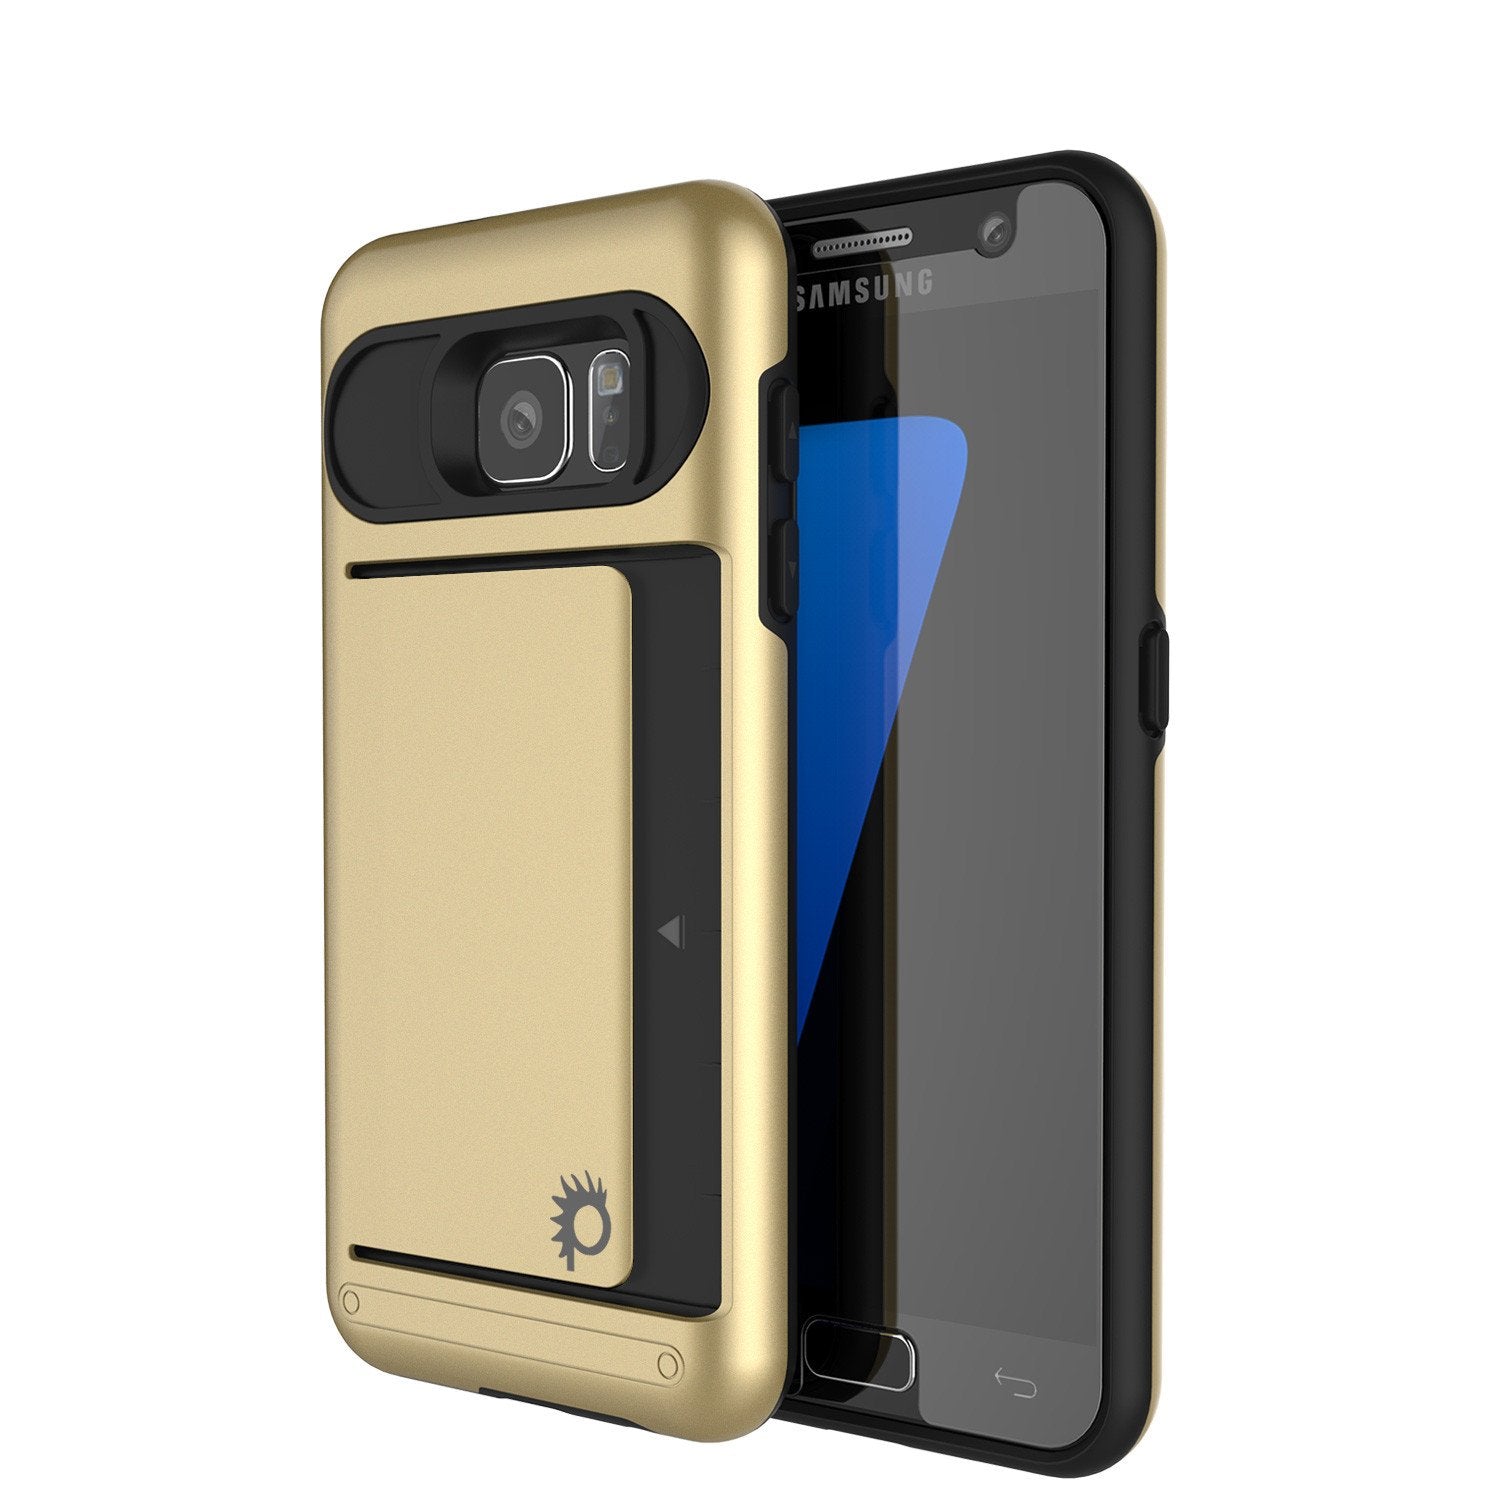 Galaxy S7 EDGE Case PunkCase CLUTCH Gold Series Slim Armor Soft Cover Case w/ Screen Protector